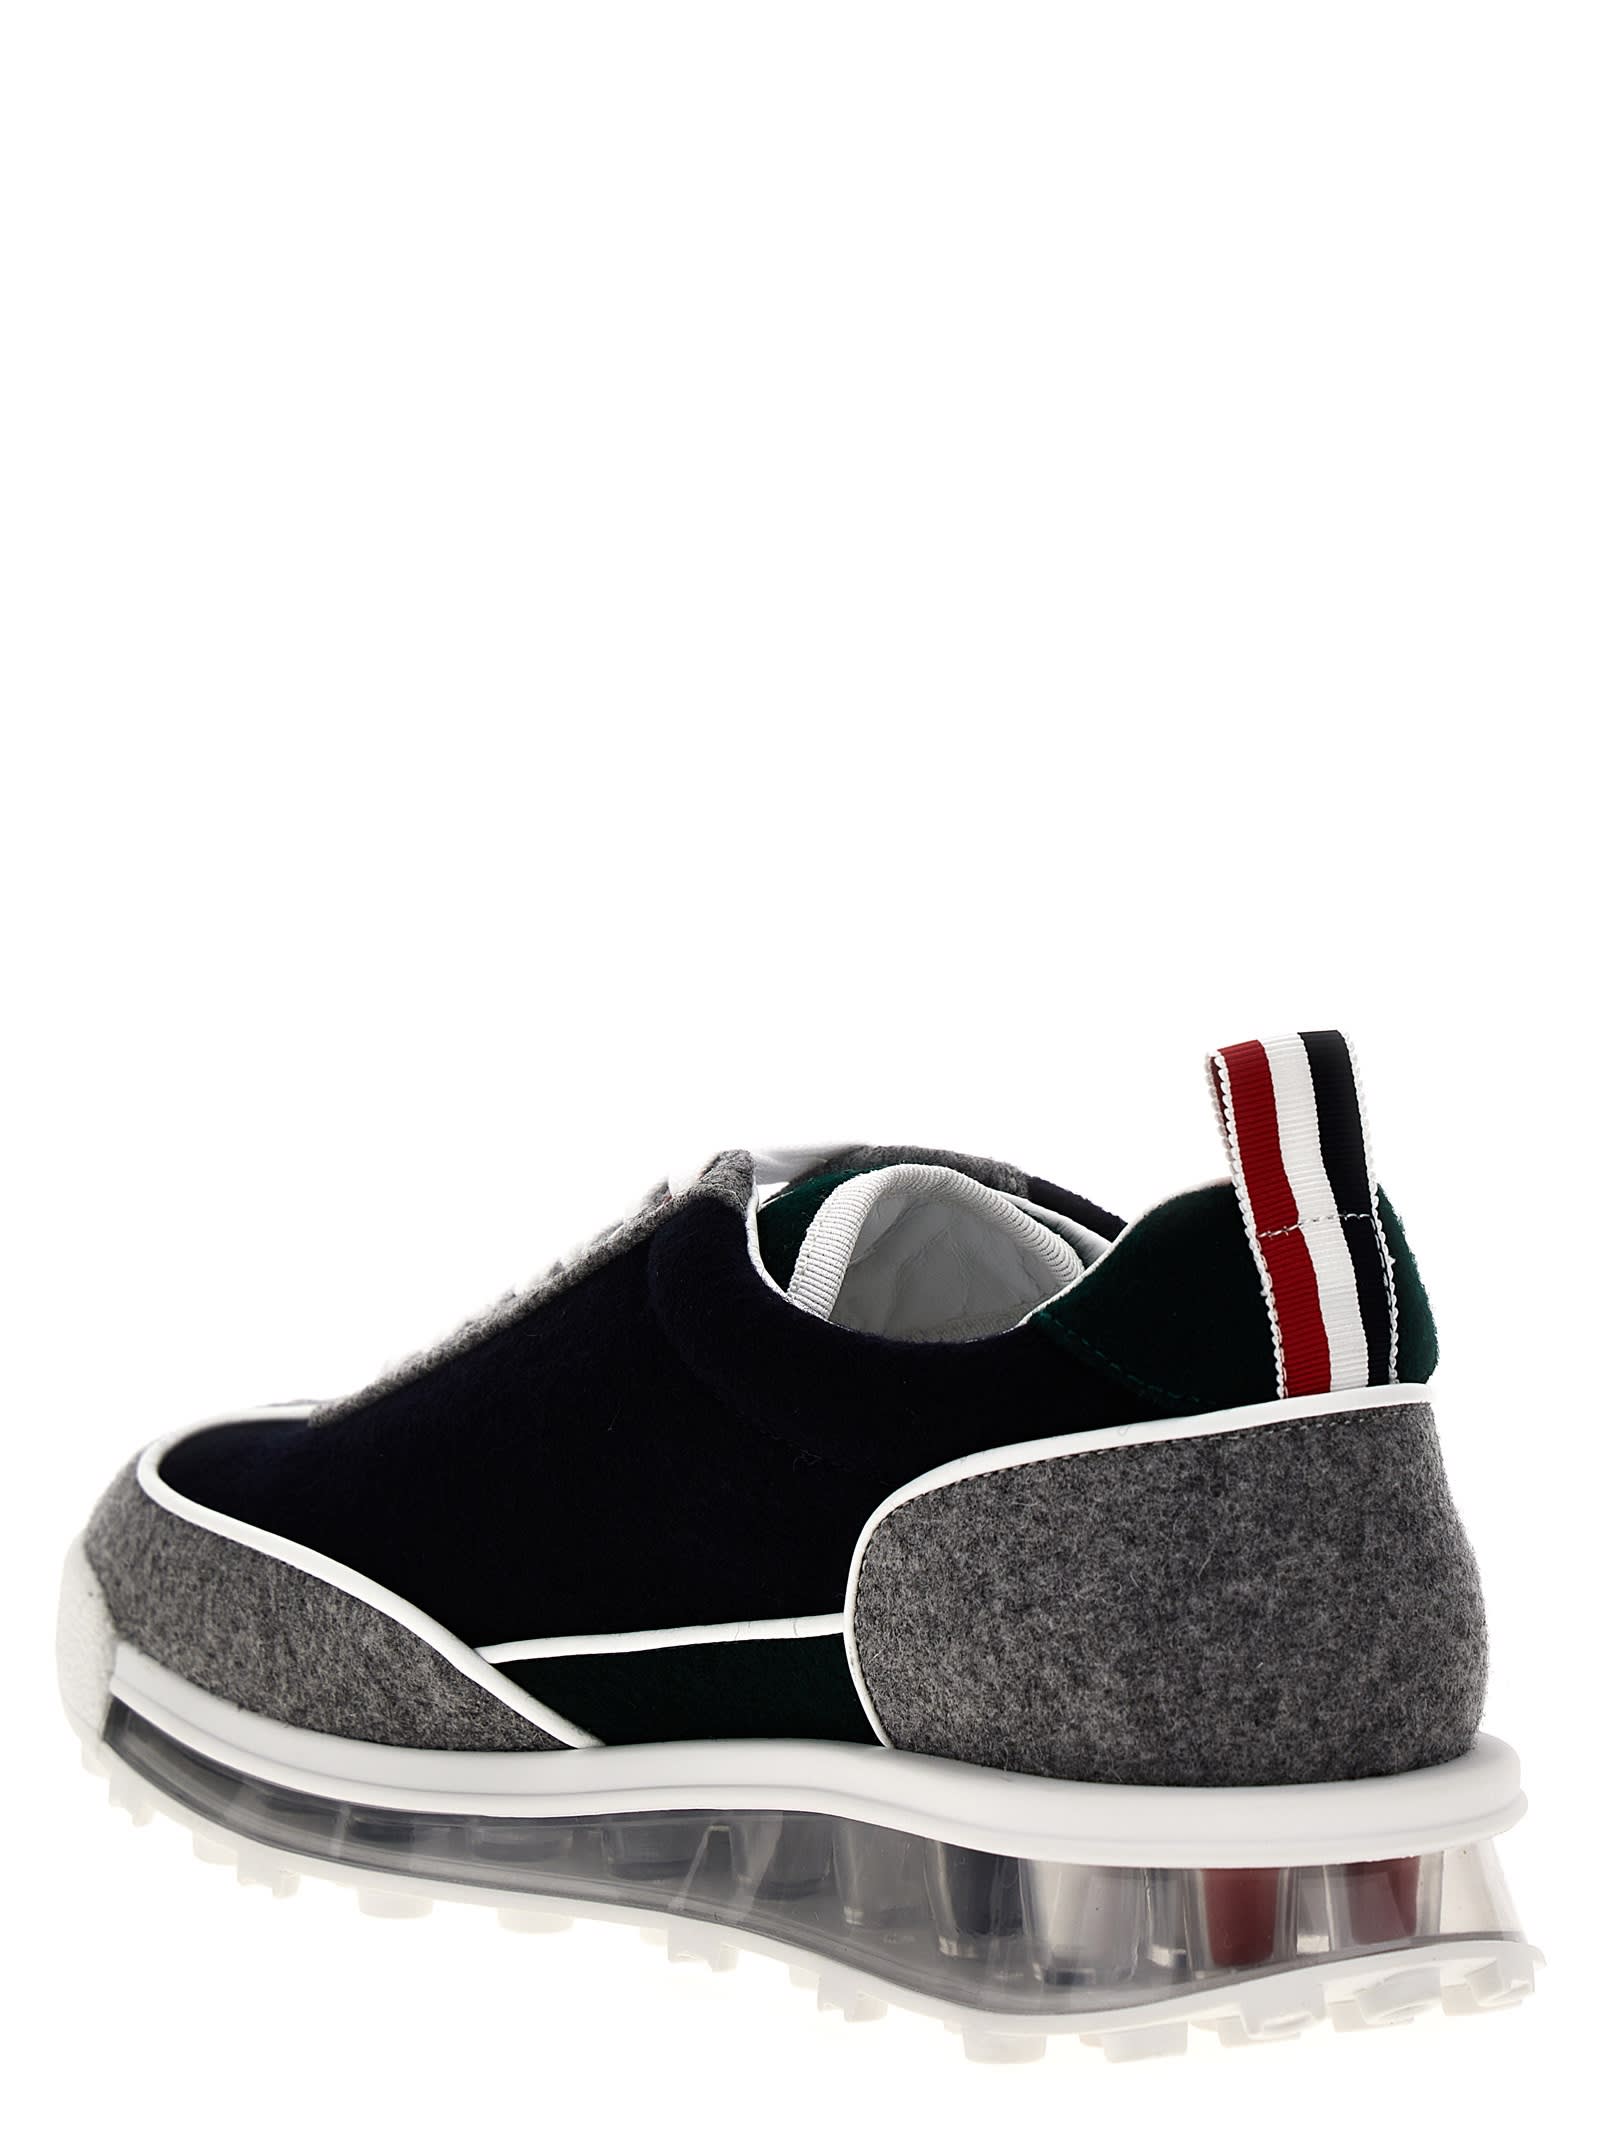 Shop Thom Browne Tech Runner Sneakers In Multicolour